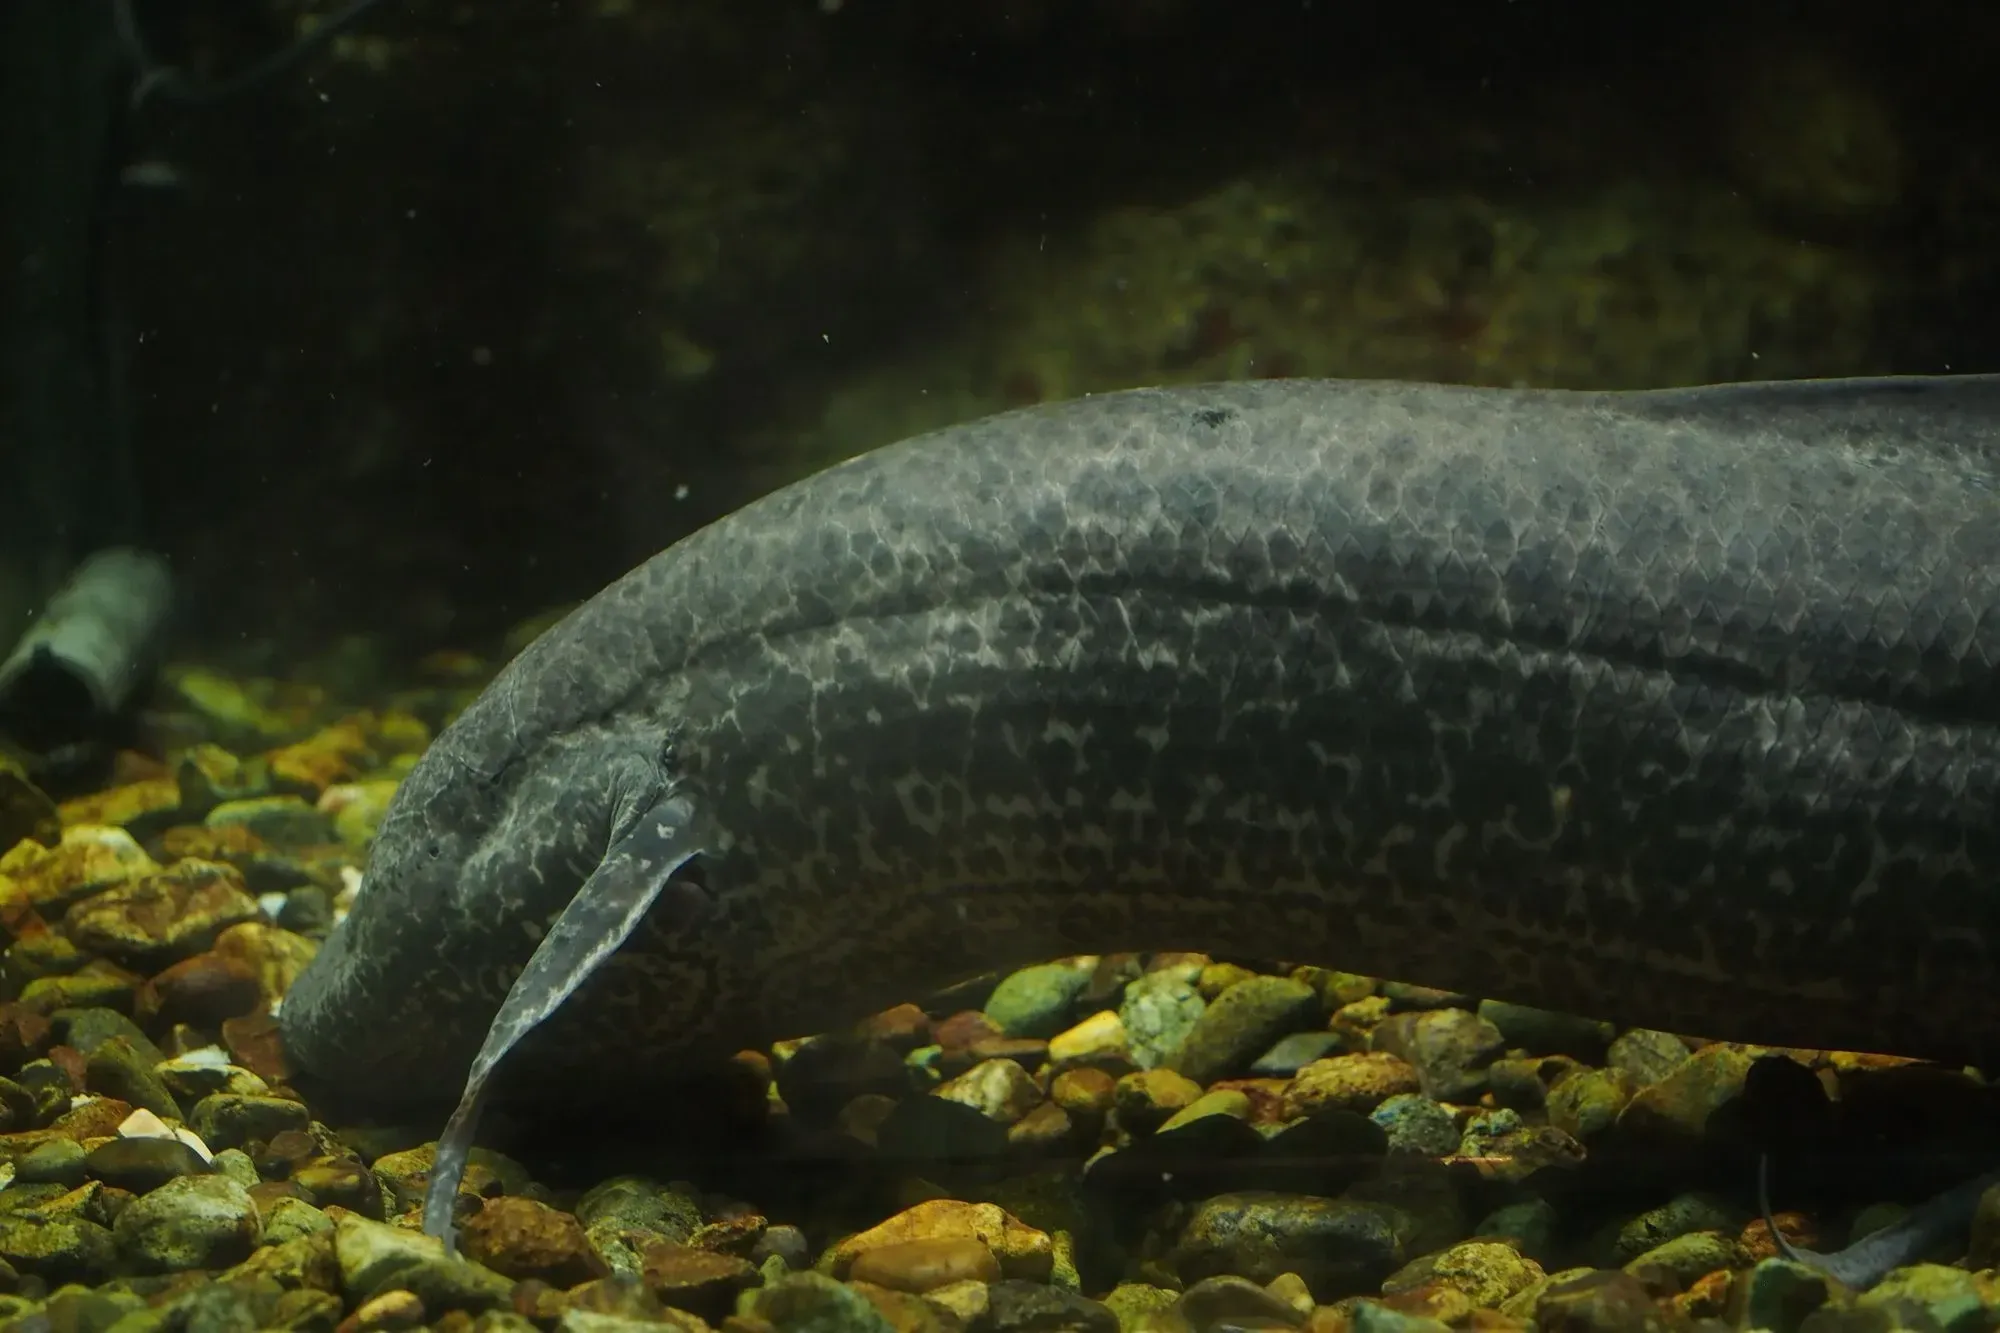 The African lungfish are often confused for eels.